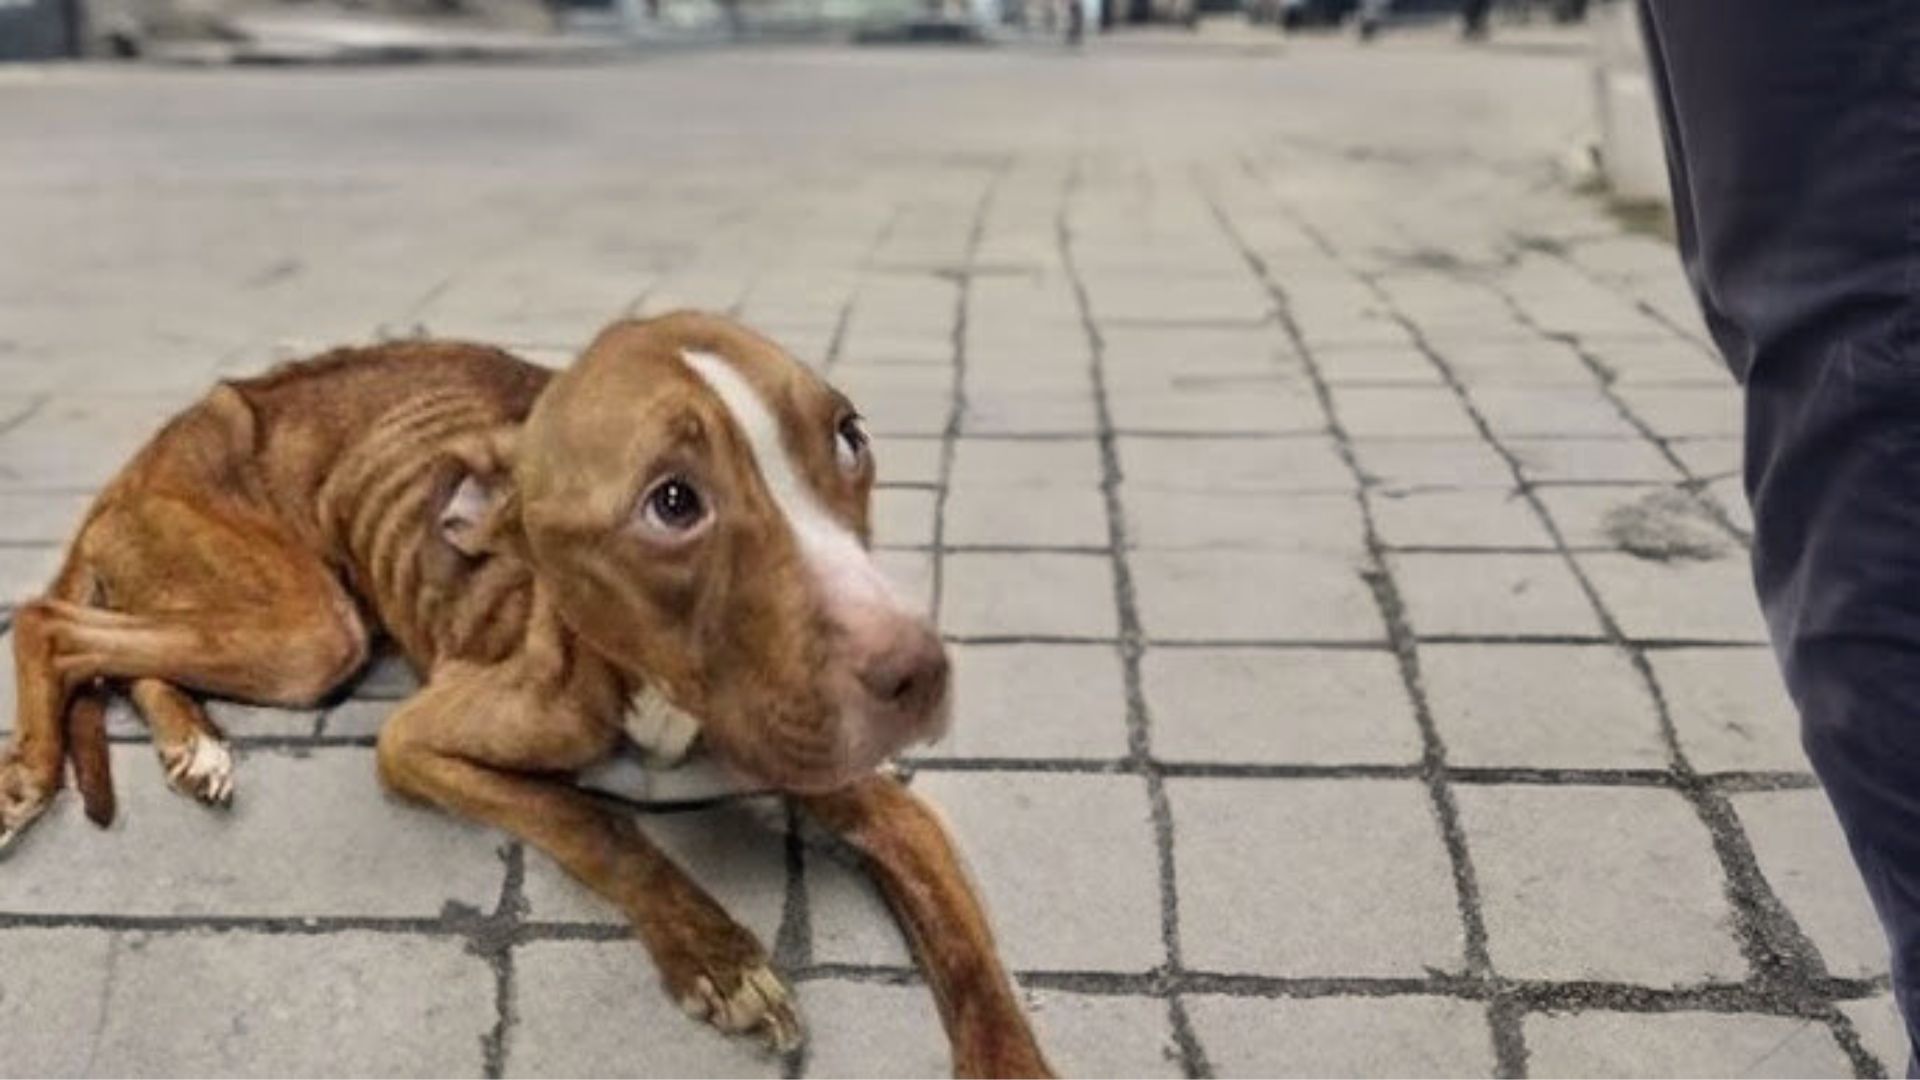 This Severely Malnourished Dog Used The Last Of His Strength To Ask Kind People For Help